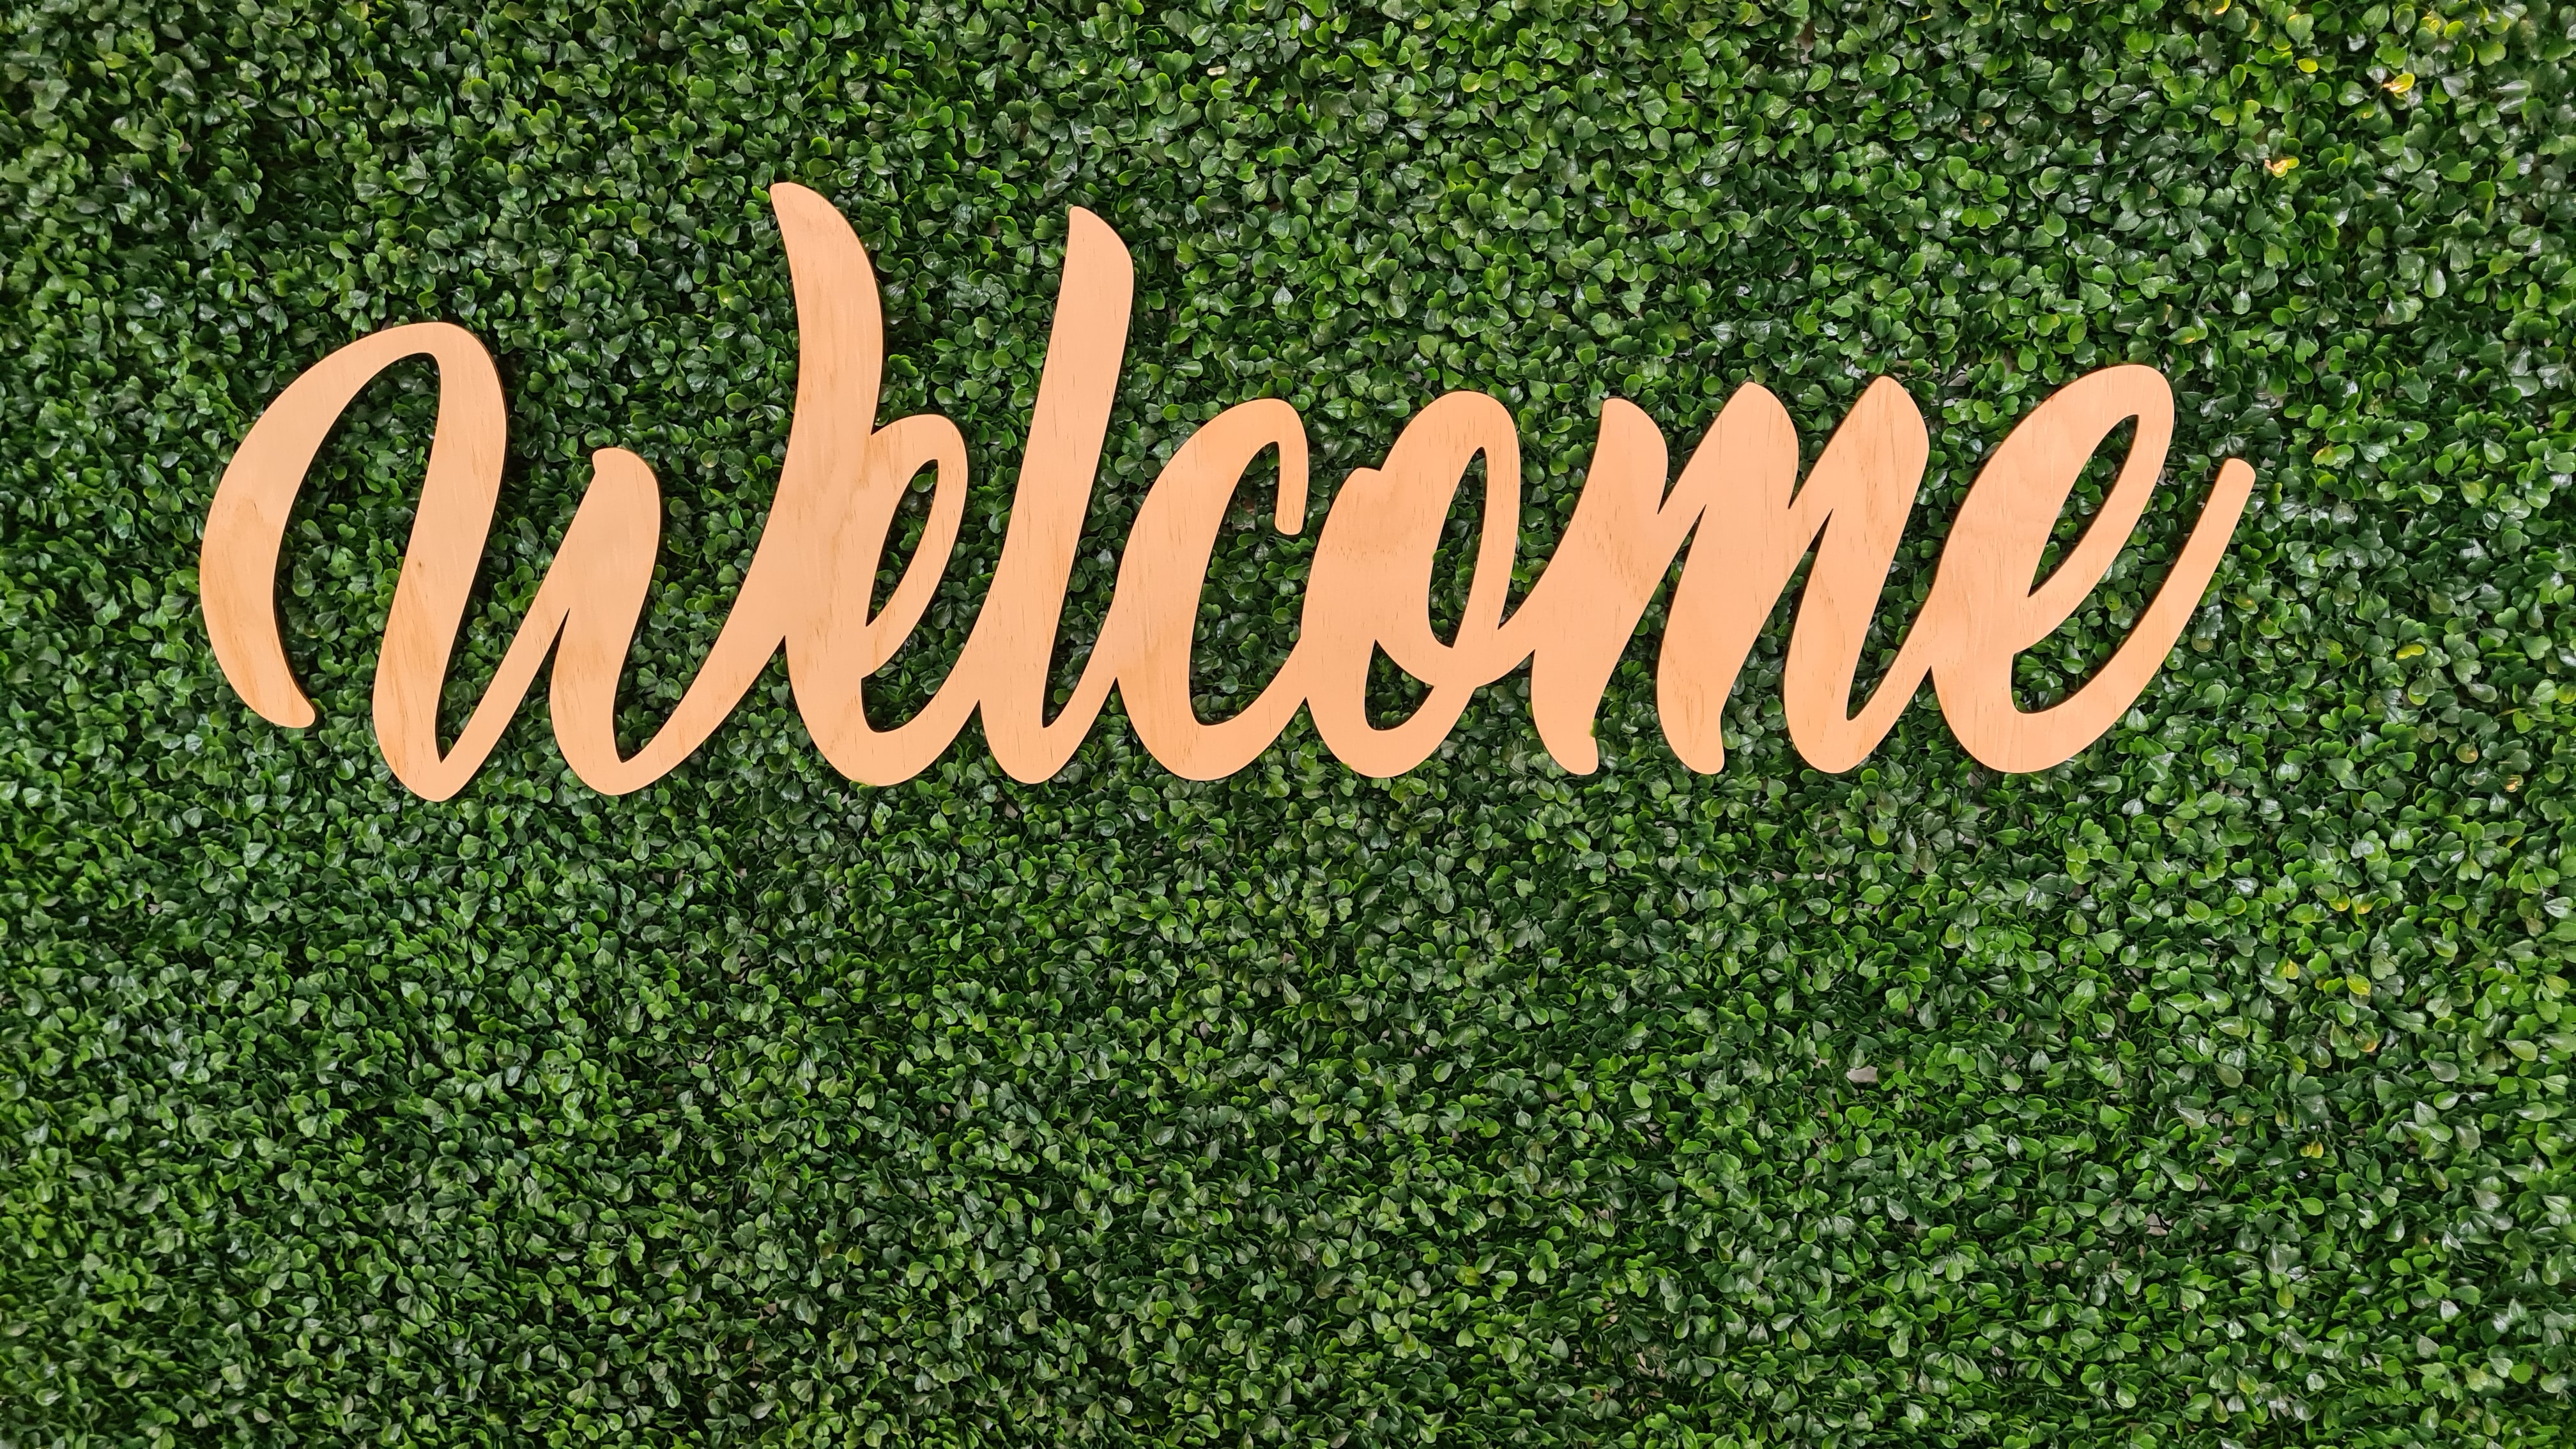 welcome sign on grass